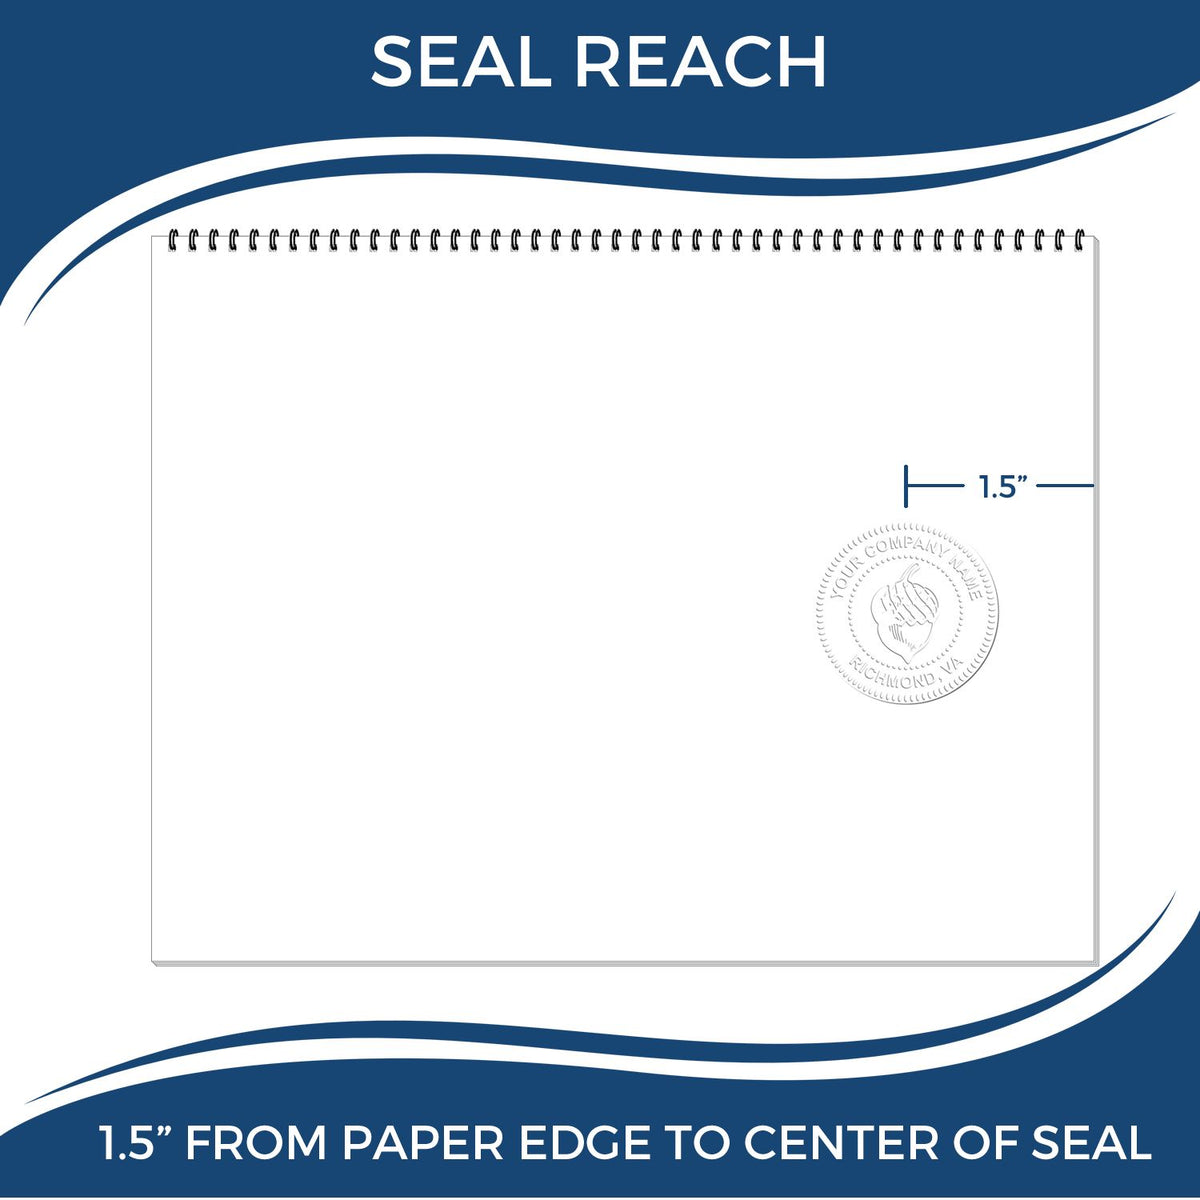 An infographic showing the seal reach which is represented by a ruler and a miniature seal image of the Soft Arkansas Professional Engineer Seal